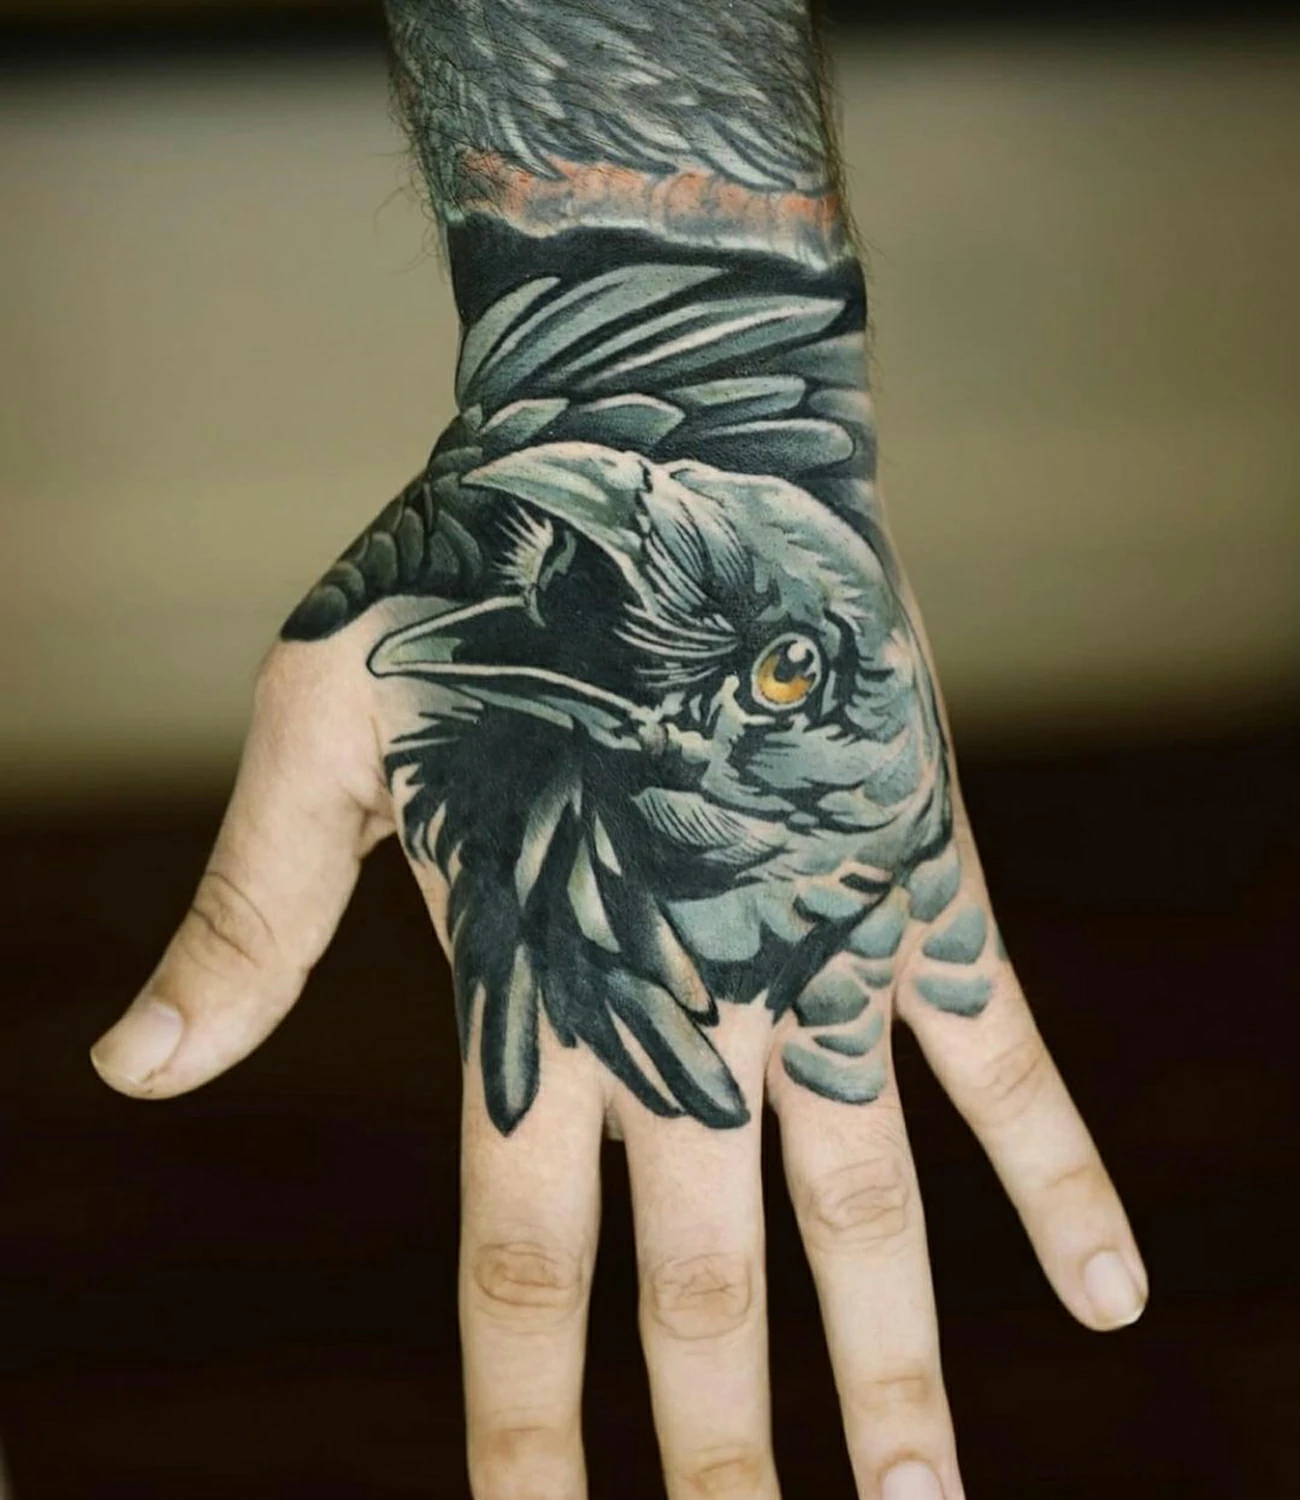 Raven hand tattoo: A bold choice, placing a raven tattoo on the hand.